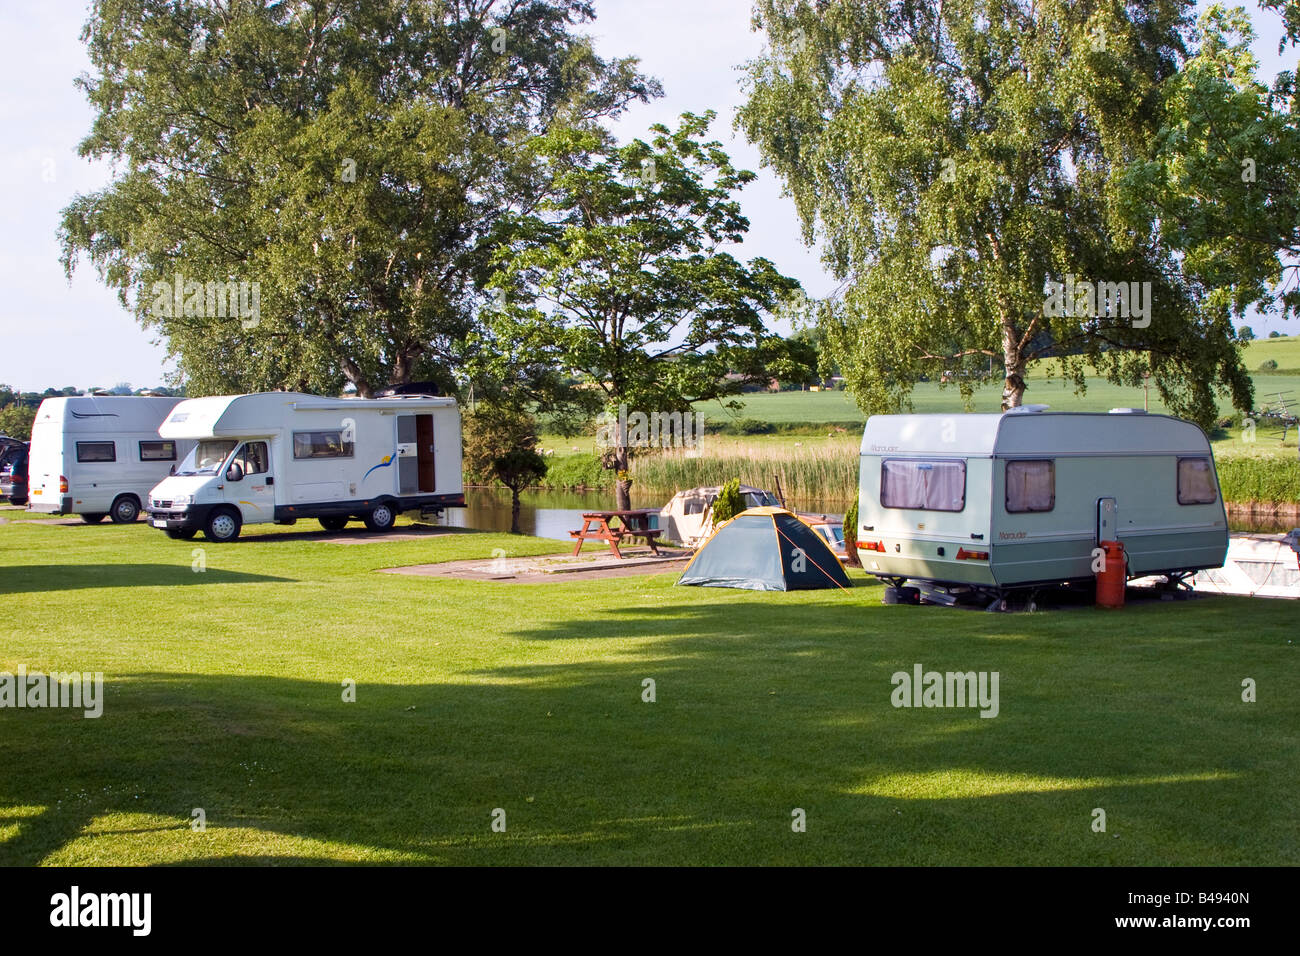 Woodbine Cottage Caravan Park on the banks of the River Weaver at Acton ...